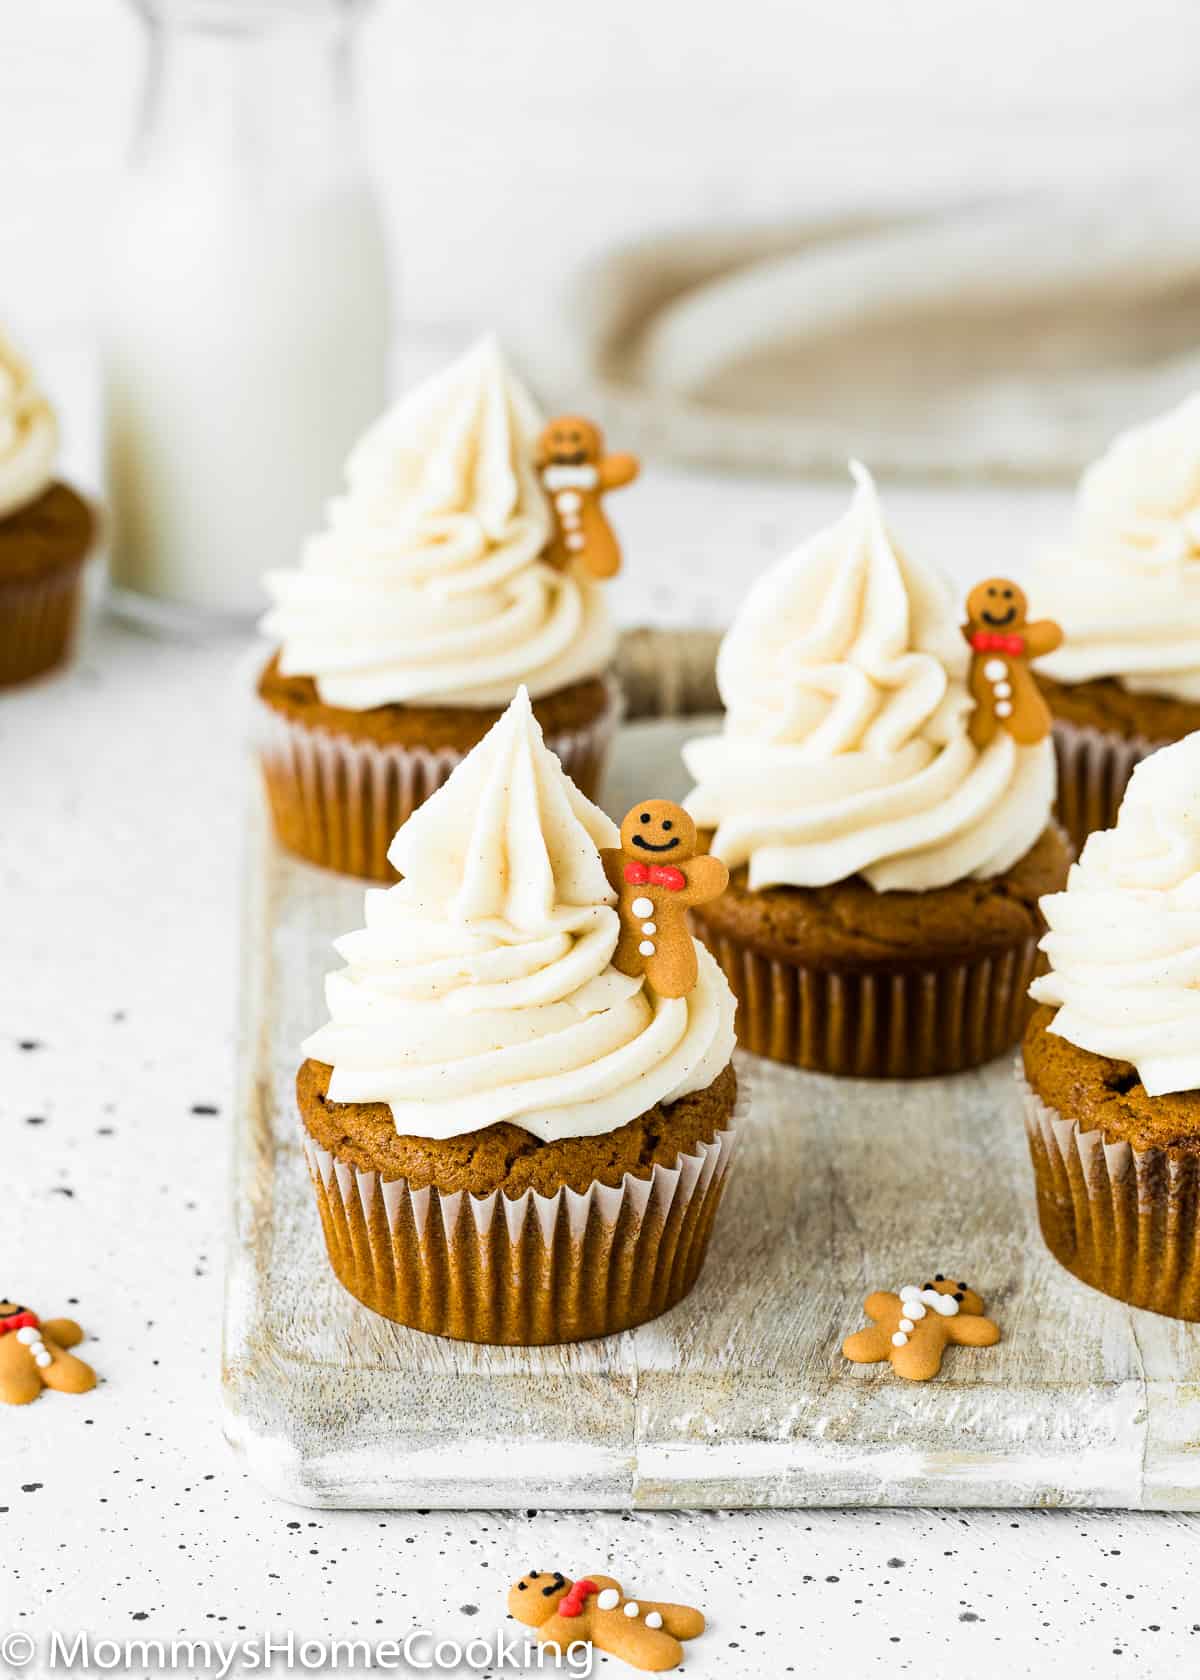 Eggless Gingerbread Cupcakes with cinnamon cream cheese frosting over a wooden surface with a bottle of milk in the background 